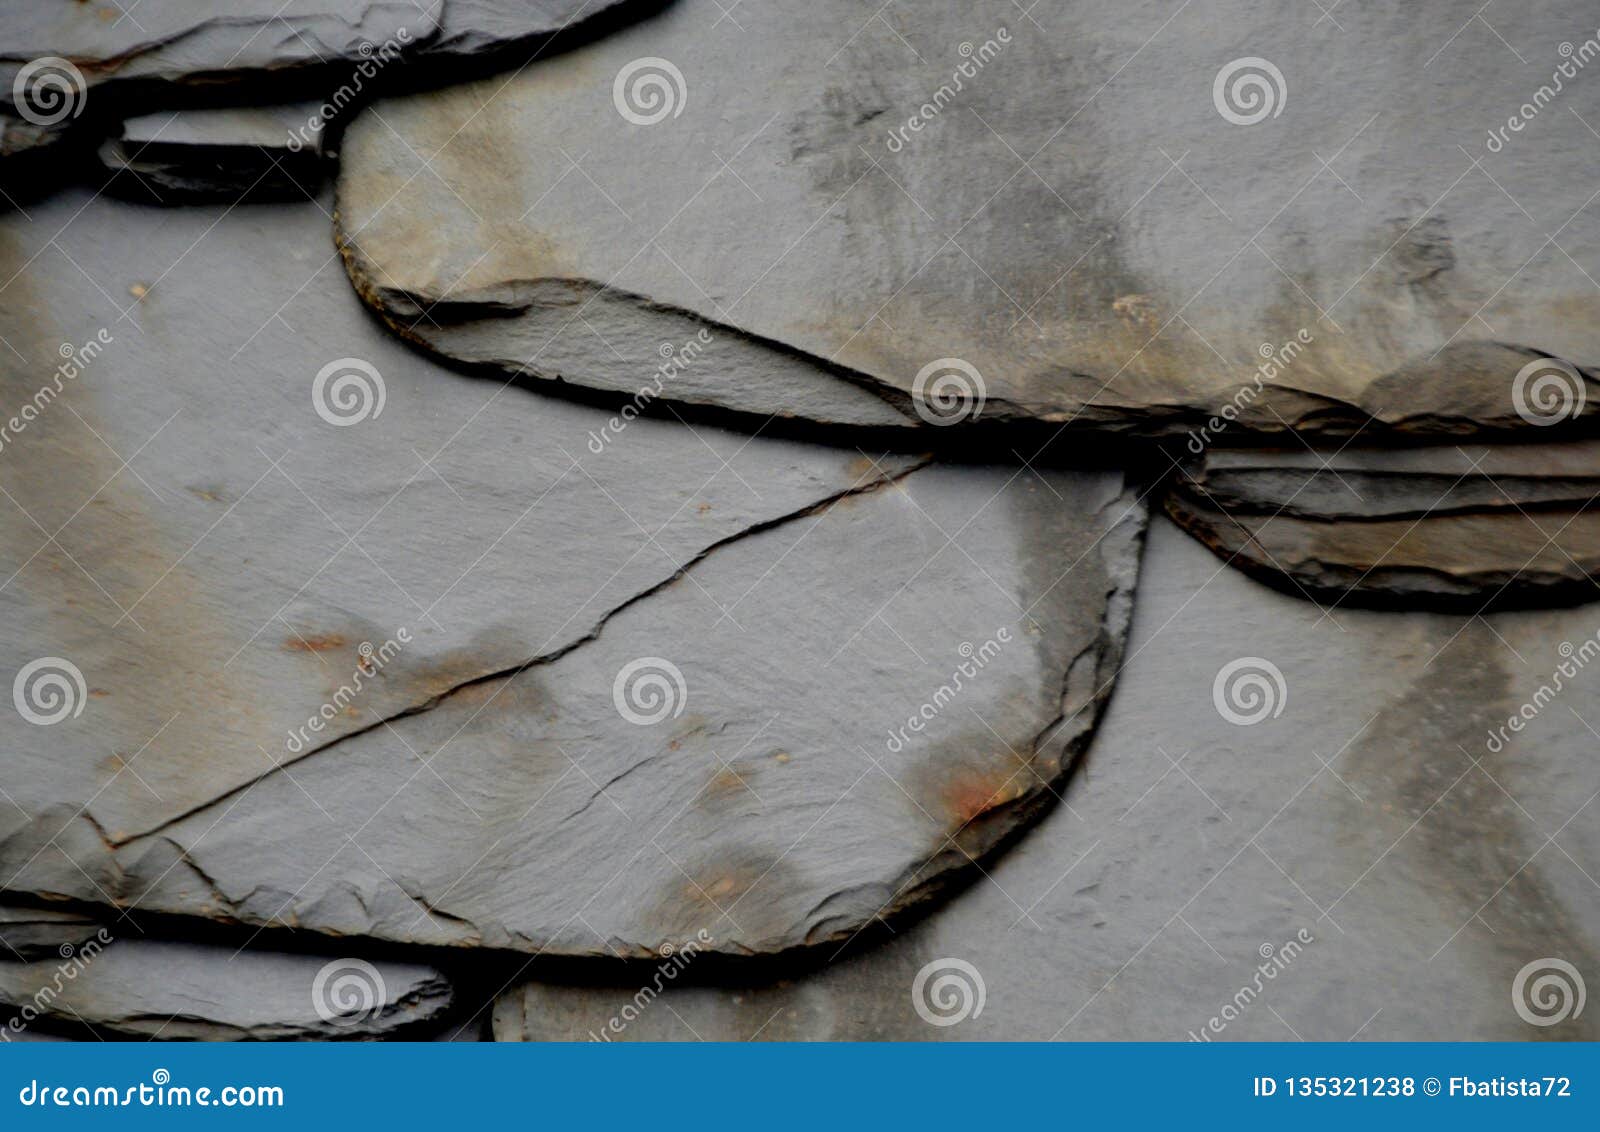 details of shale roof on a house built from schist in piodÃÂ¯ÃÂ¿ÃÂ½o, one of portugal`s schist villages in the aldeias do xisto